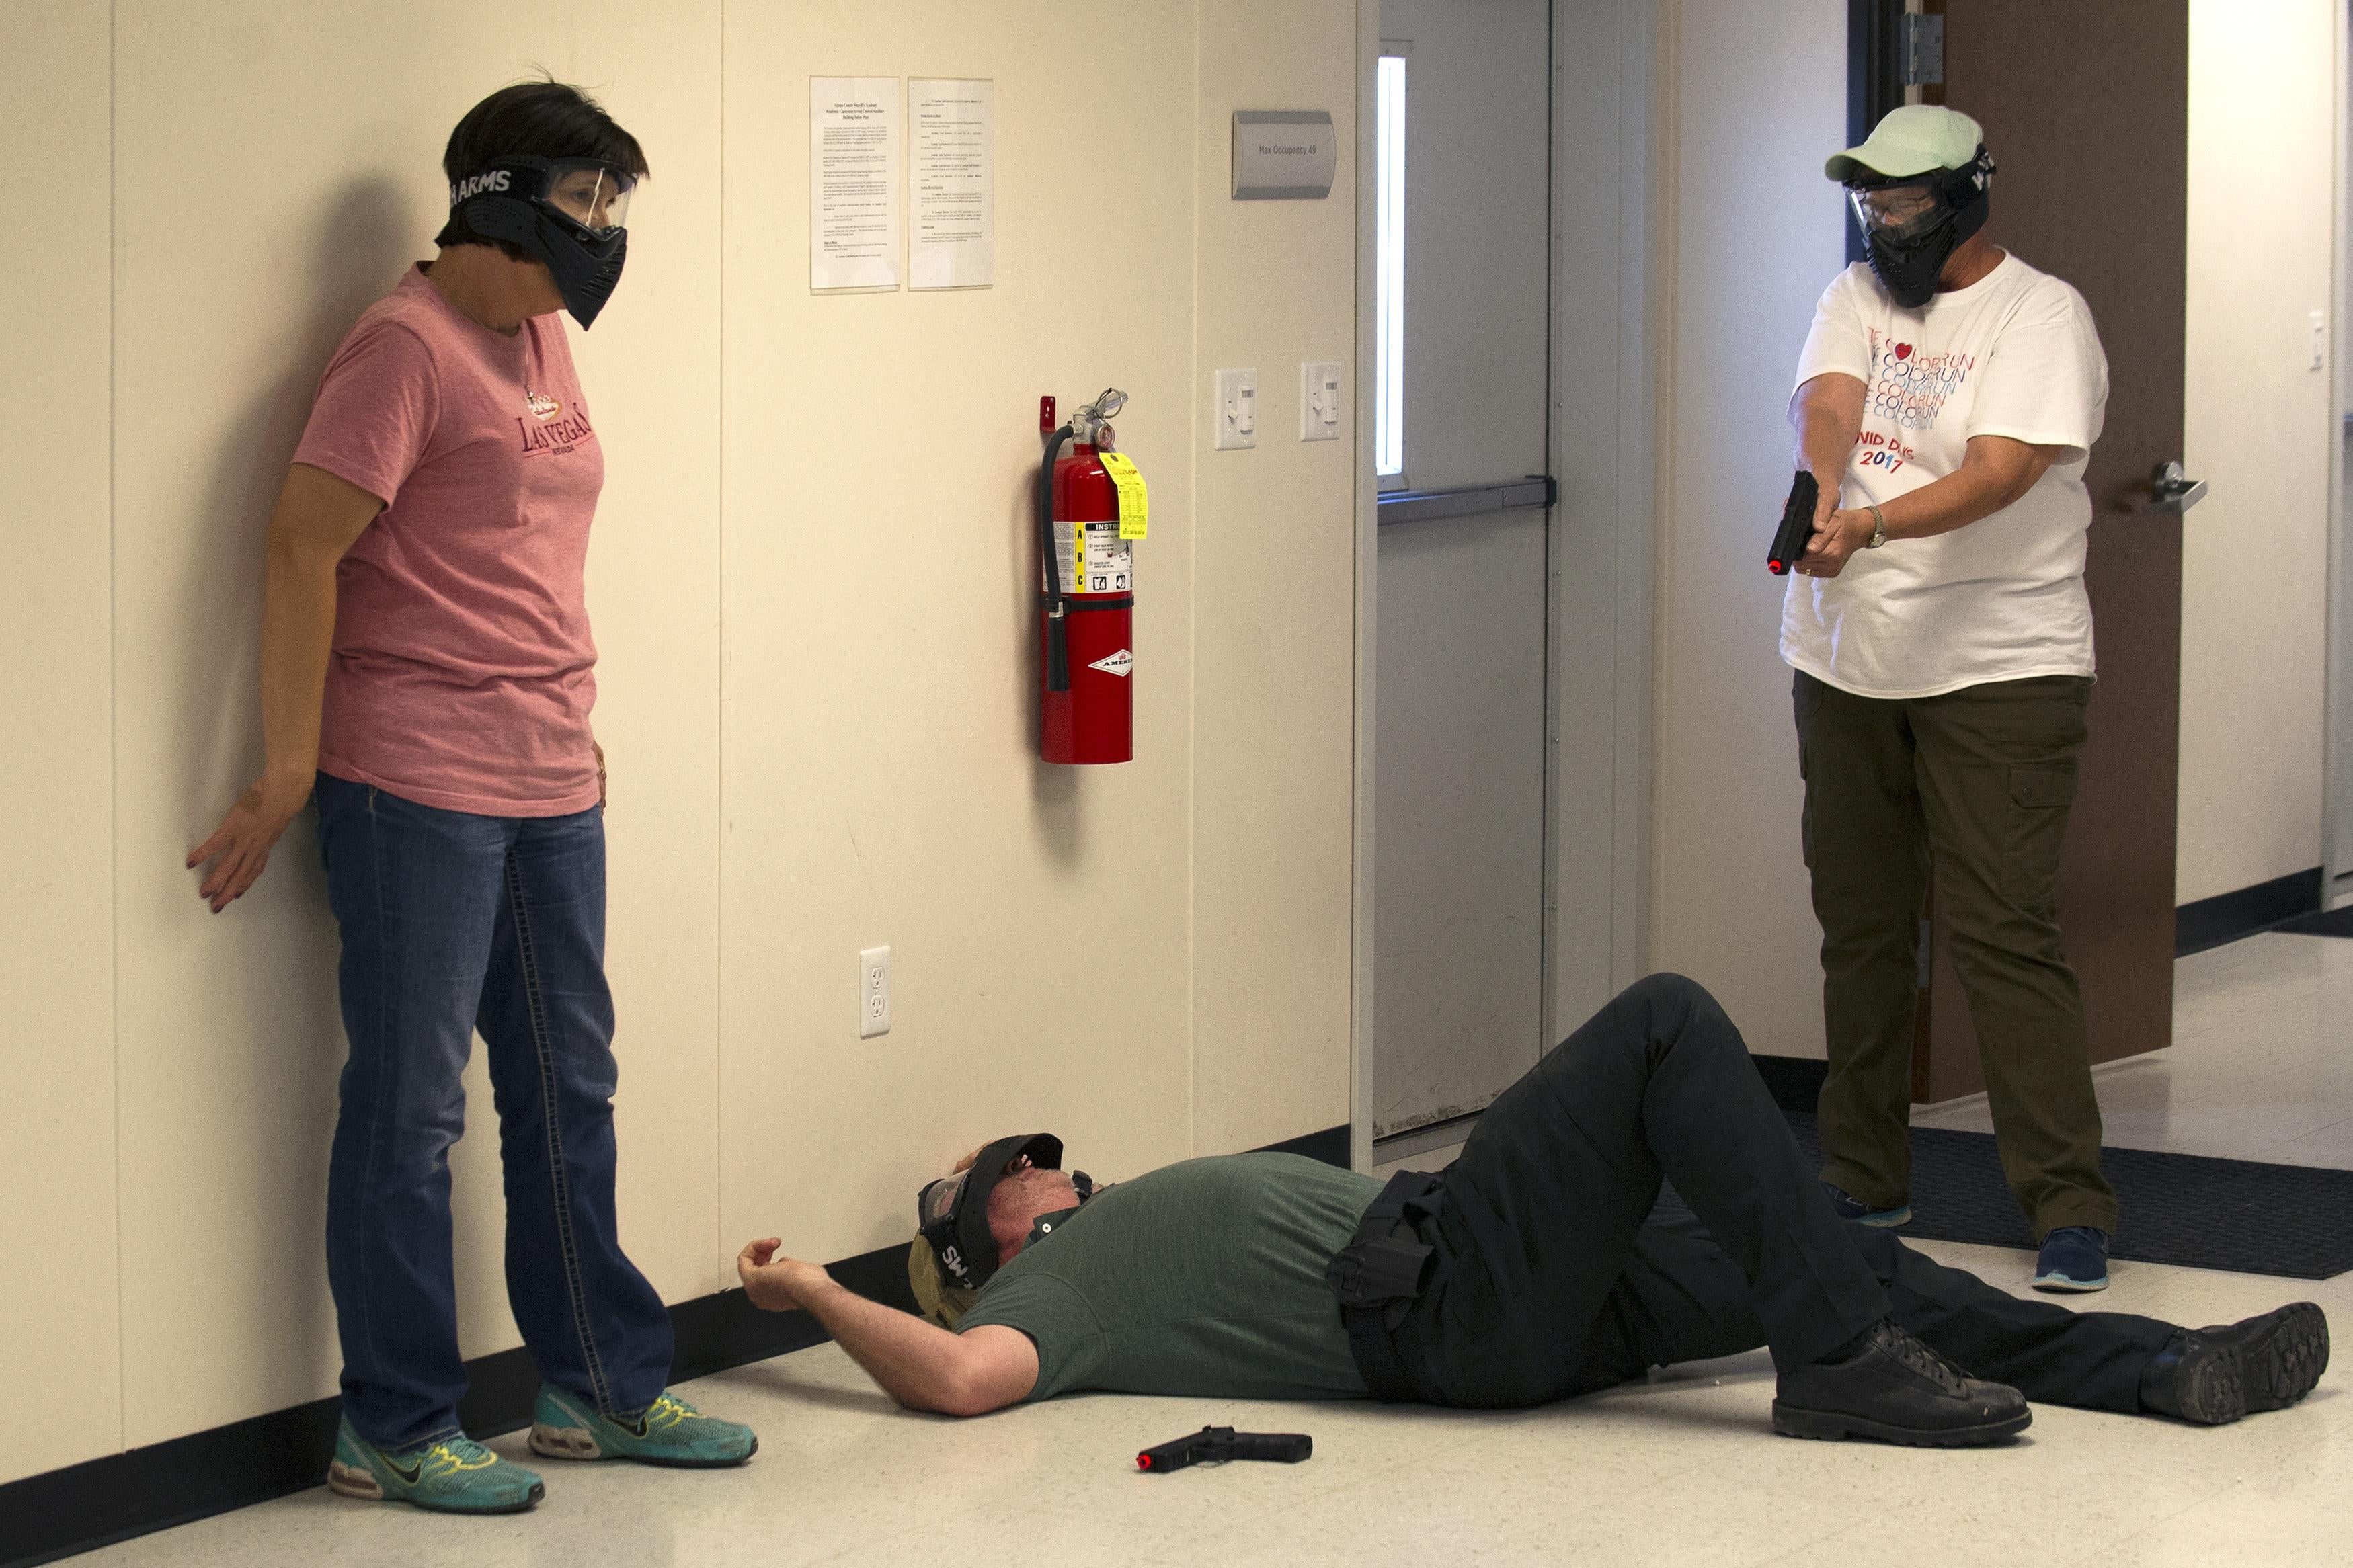 A person wearing a paintball mask points a pellet gun at a man lying on the ground in a hallway. Another person stands next to that man.